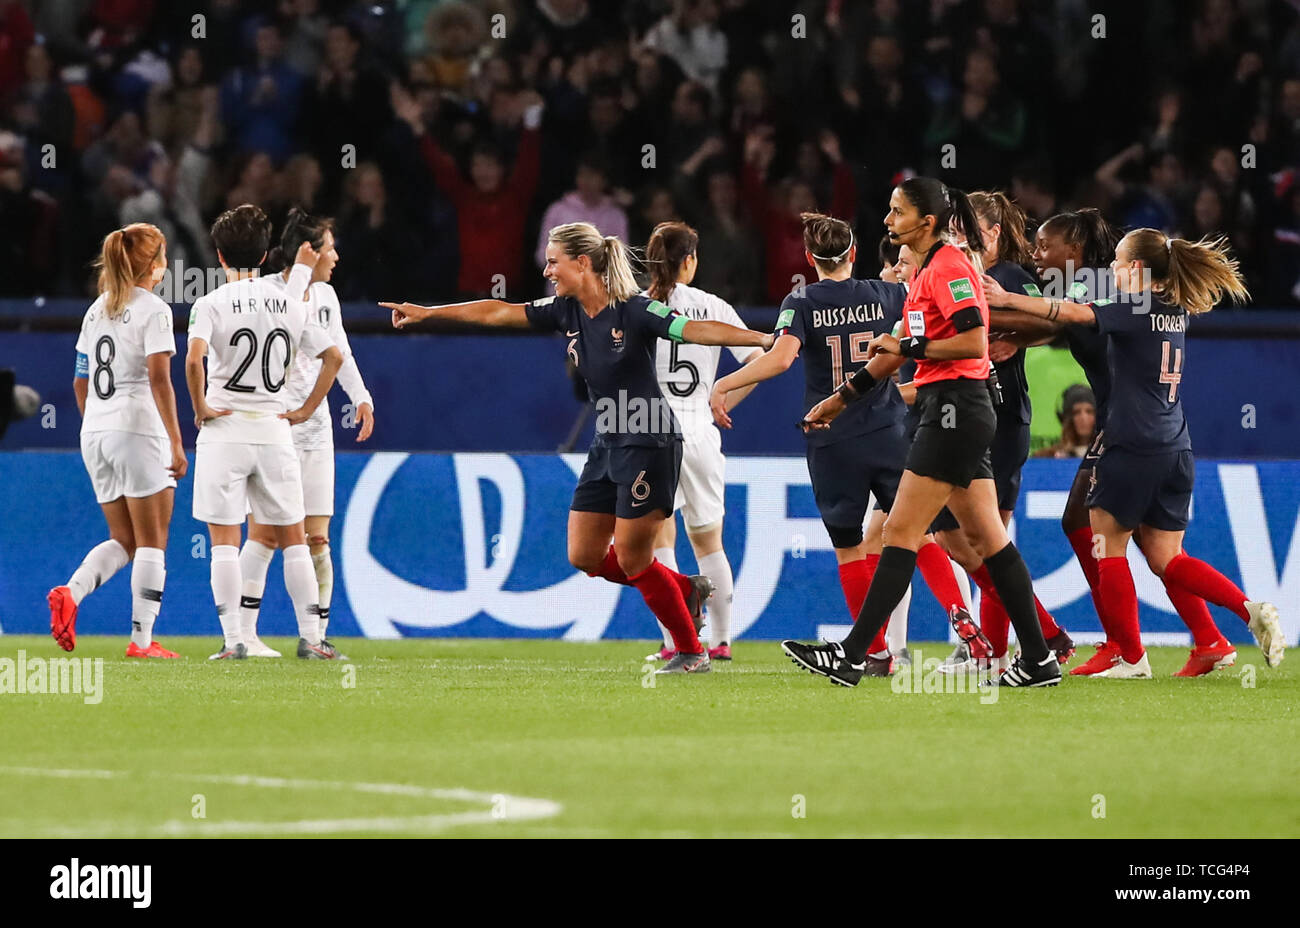 Paris, France. 7th June, 2019. Amandine Henry (4th L) of France celebrates scoring during the opening match between France and South Korea at the 2019 FIFA Women's World Cup in Paris, France, on June 7, 2019. France won 4-0. Credit: Shan Yuqi/Xinhua/Alamy Live News Stock Photo